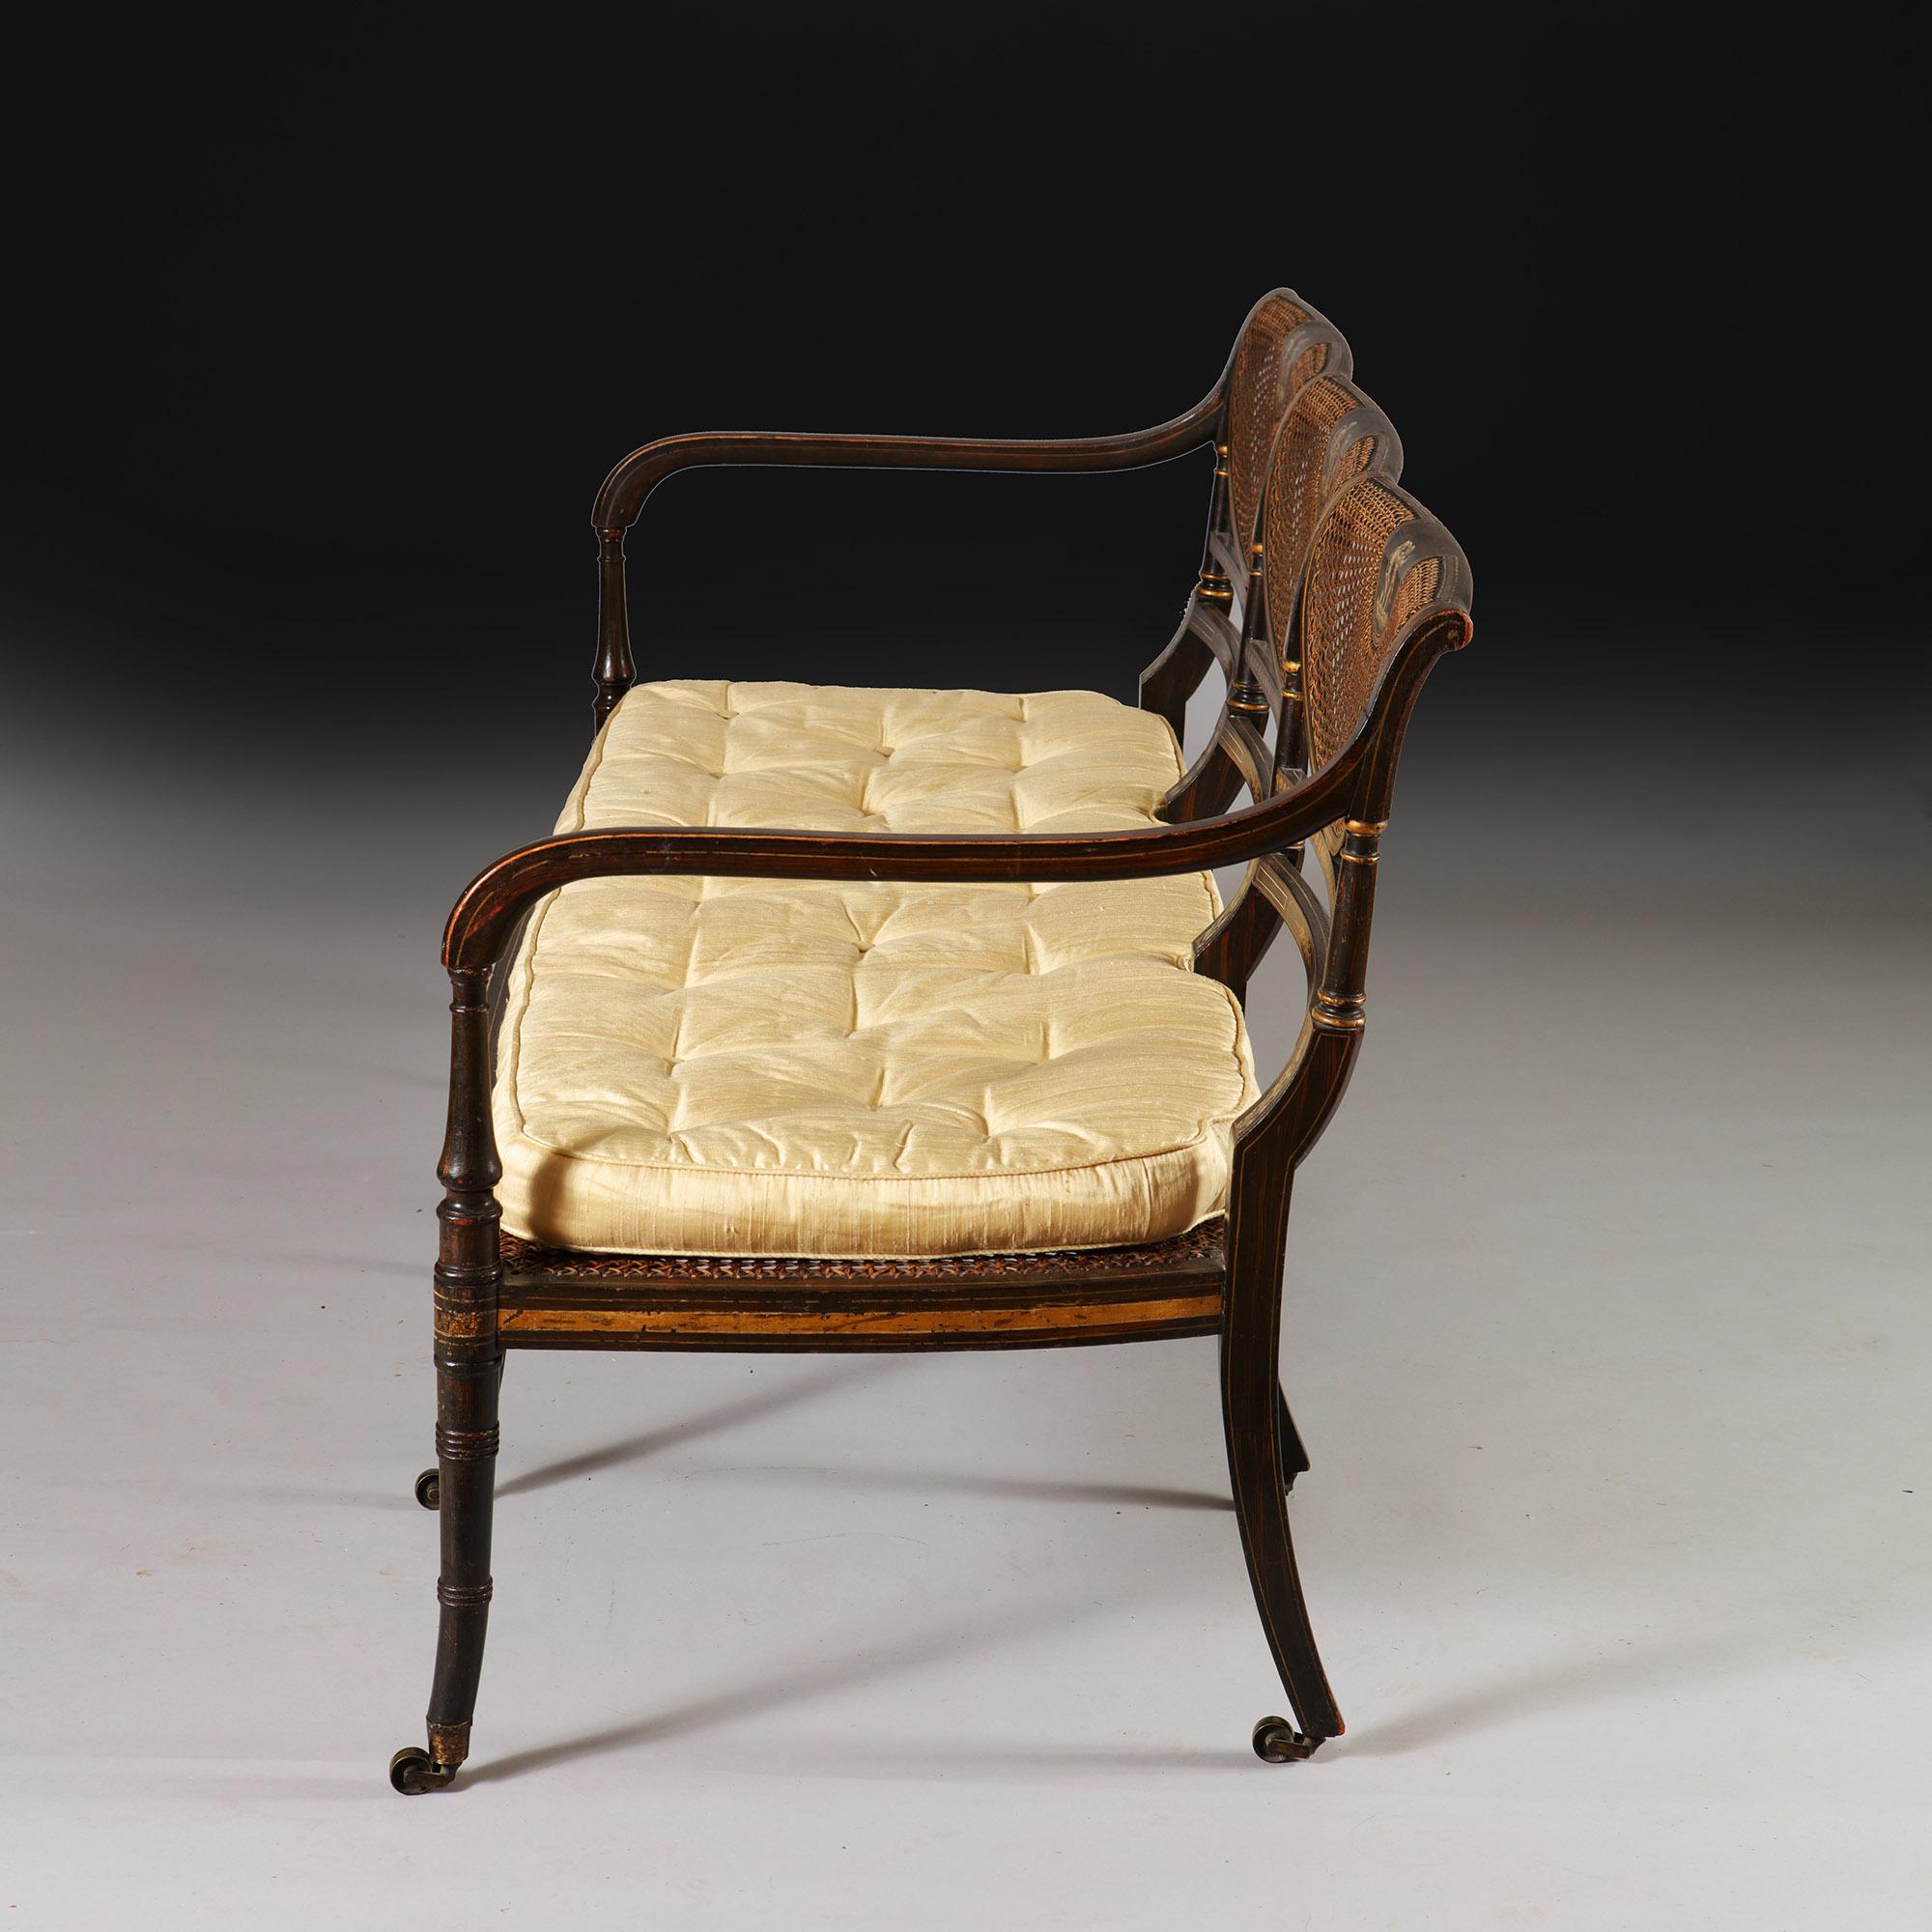 A Fine Simulated Rosewood and Gilt Decorated George III Sheraton Period Settee In Good Condition For Sale In Oxfordshire, United Kingdom